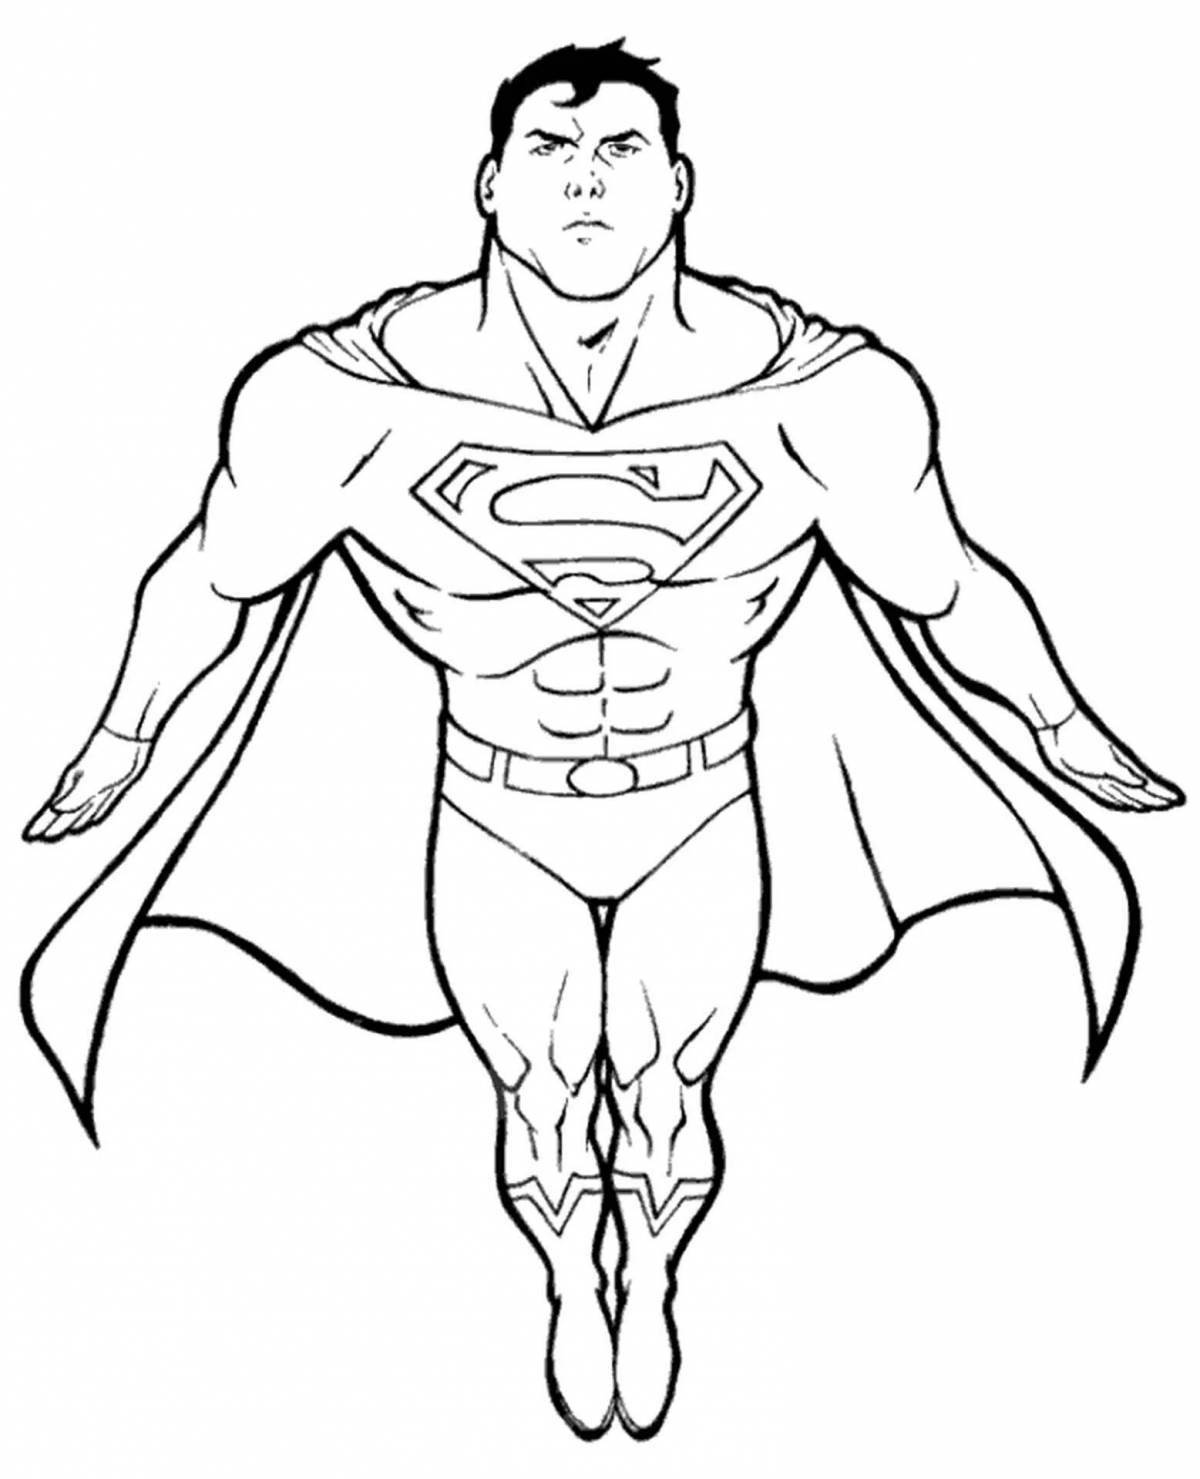 Amazing superman coloring book for kids